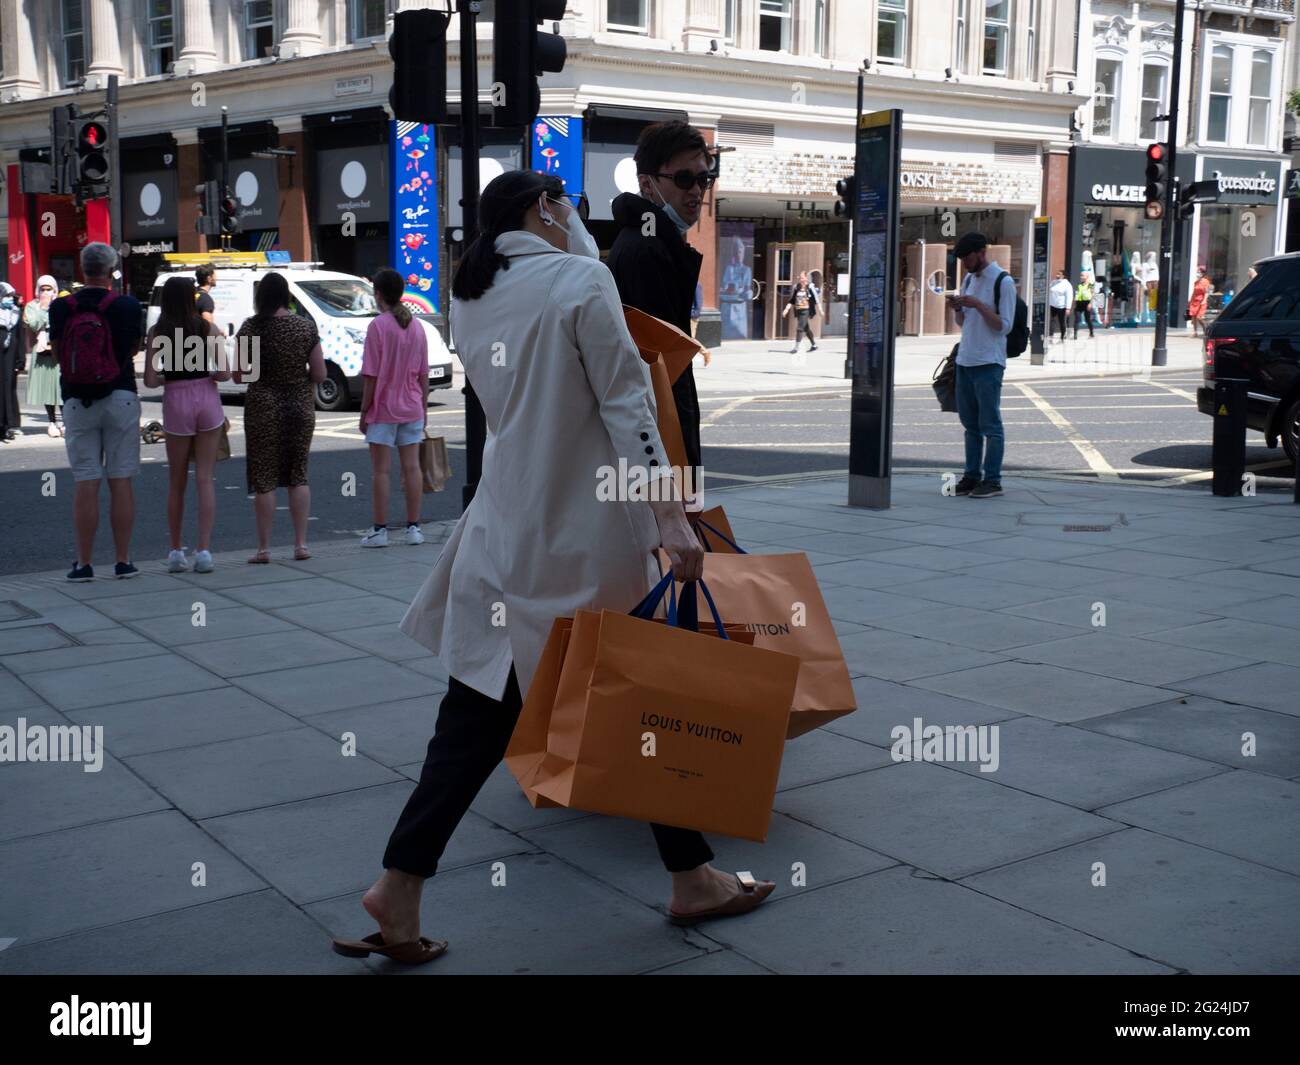 cache Postimpressionisme grådig Shoppers with Louis Vuitton bags in Oxford Street London, pass bus with  advert for fashion outlet boohoo Stock Photo - Alamy